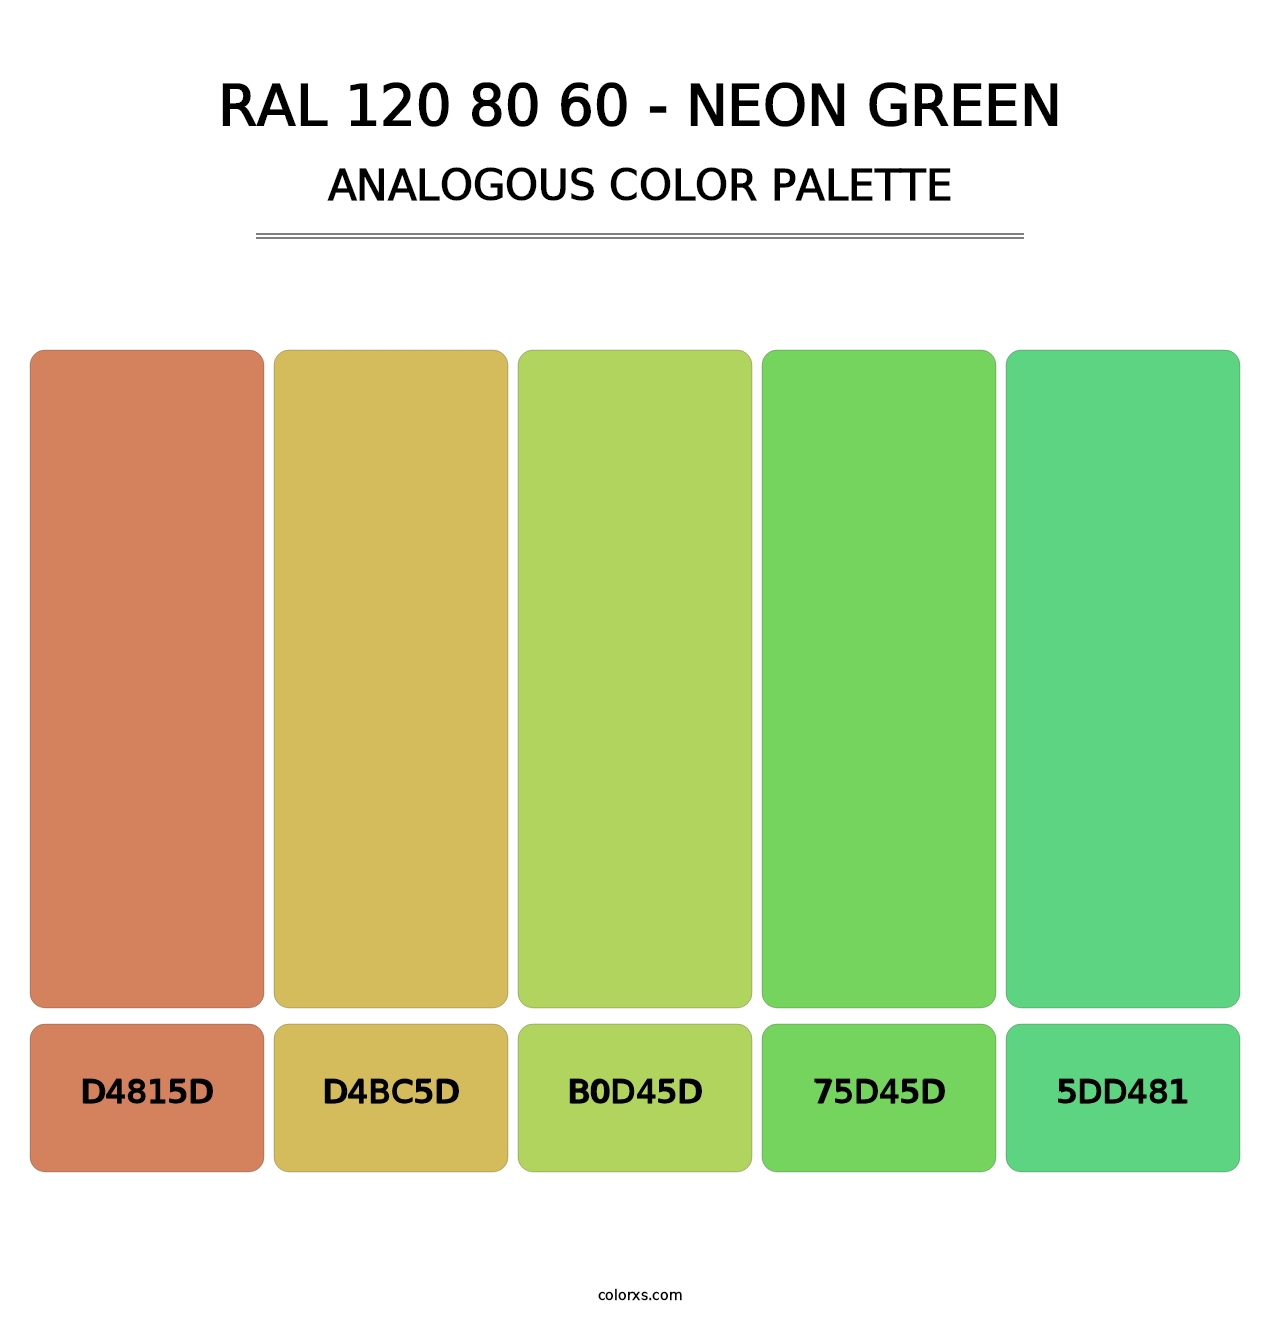 RAL 120 80 60 - Neon Green - Analogous Color Palette